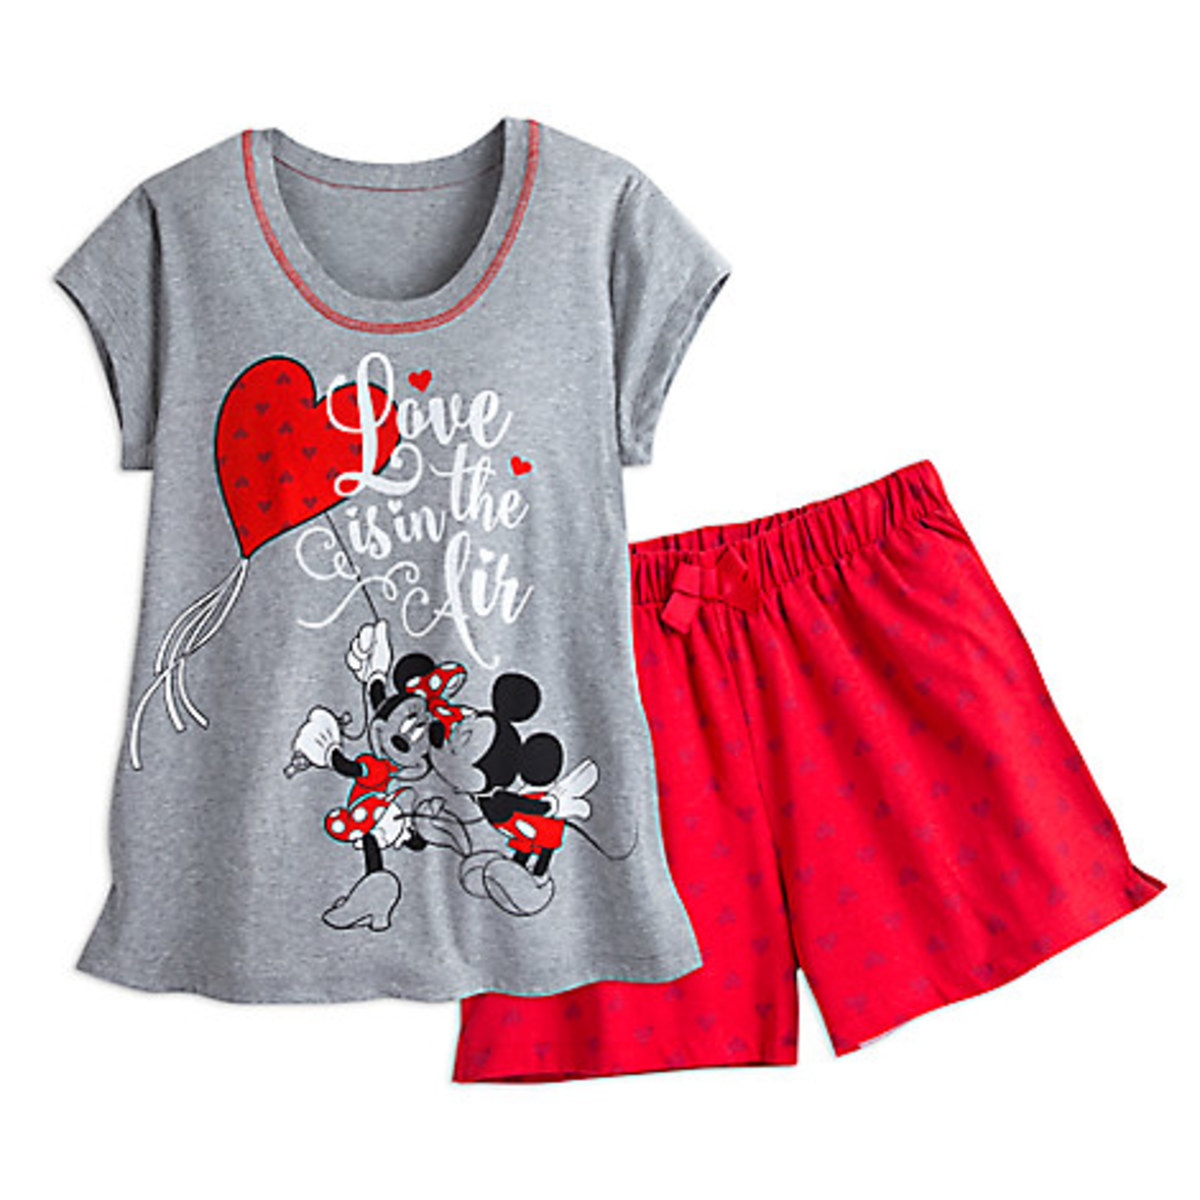 A Disney pajama set is a great Valentine's gift. 